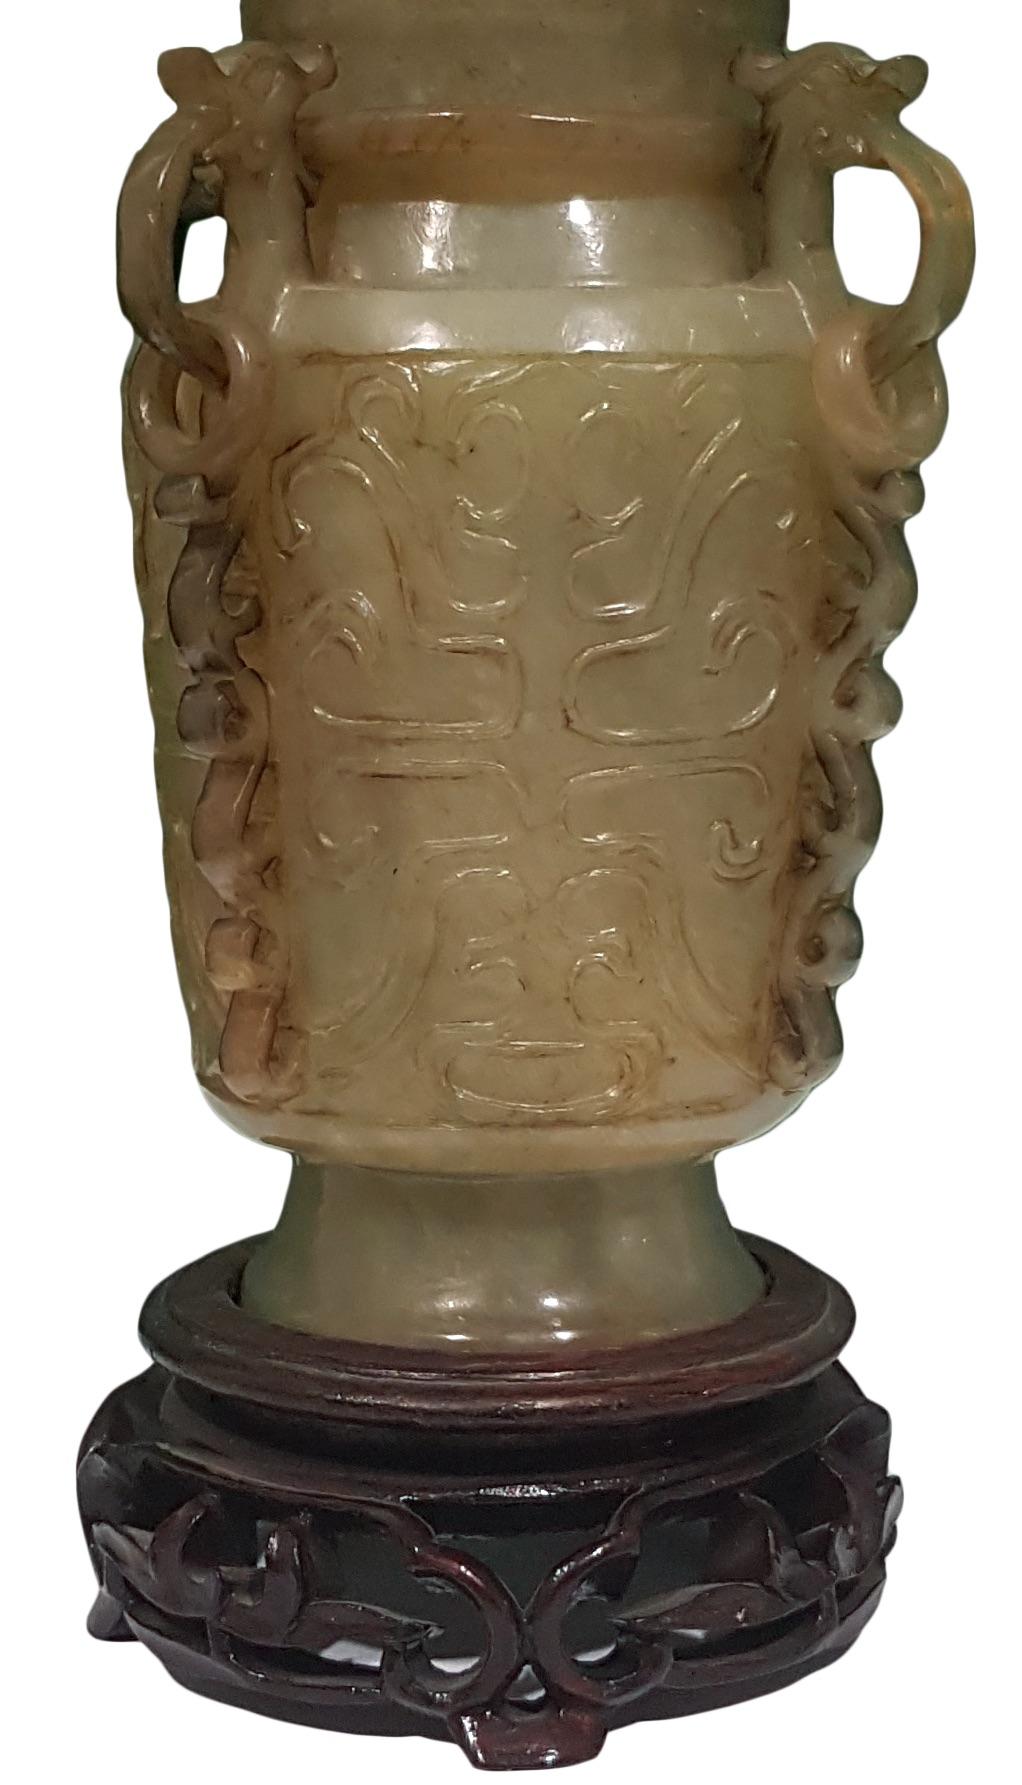 Green Jade with wooden base friezed with decorations representing plants and vegetation.
Measure: 25 x 10 x 10 cm (with base) – 22 x 10 x 10 cm (without base).

This artwork is shipped from Italy. Under existing legislation, any artwork in Italy